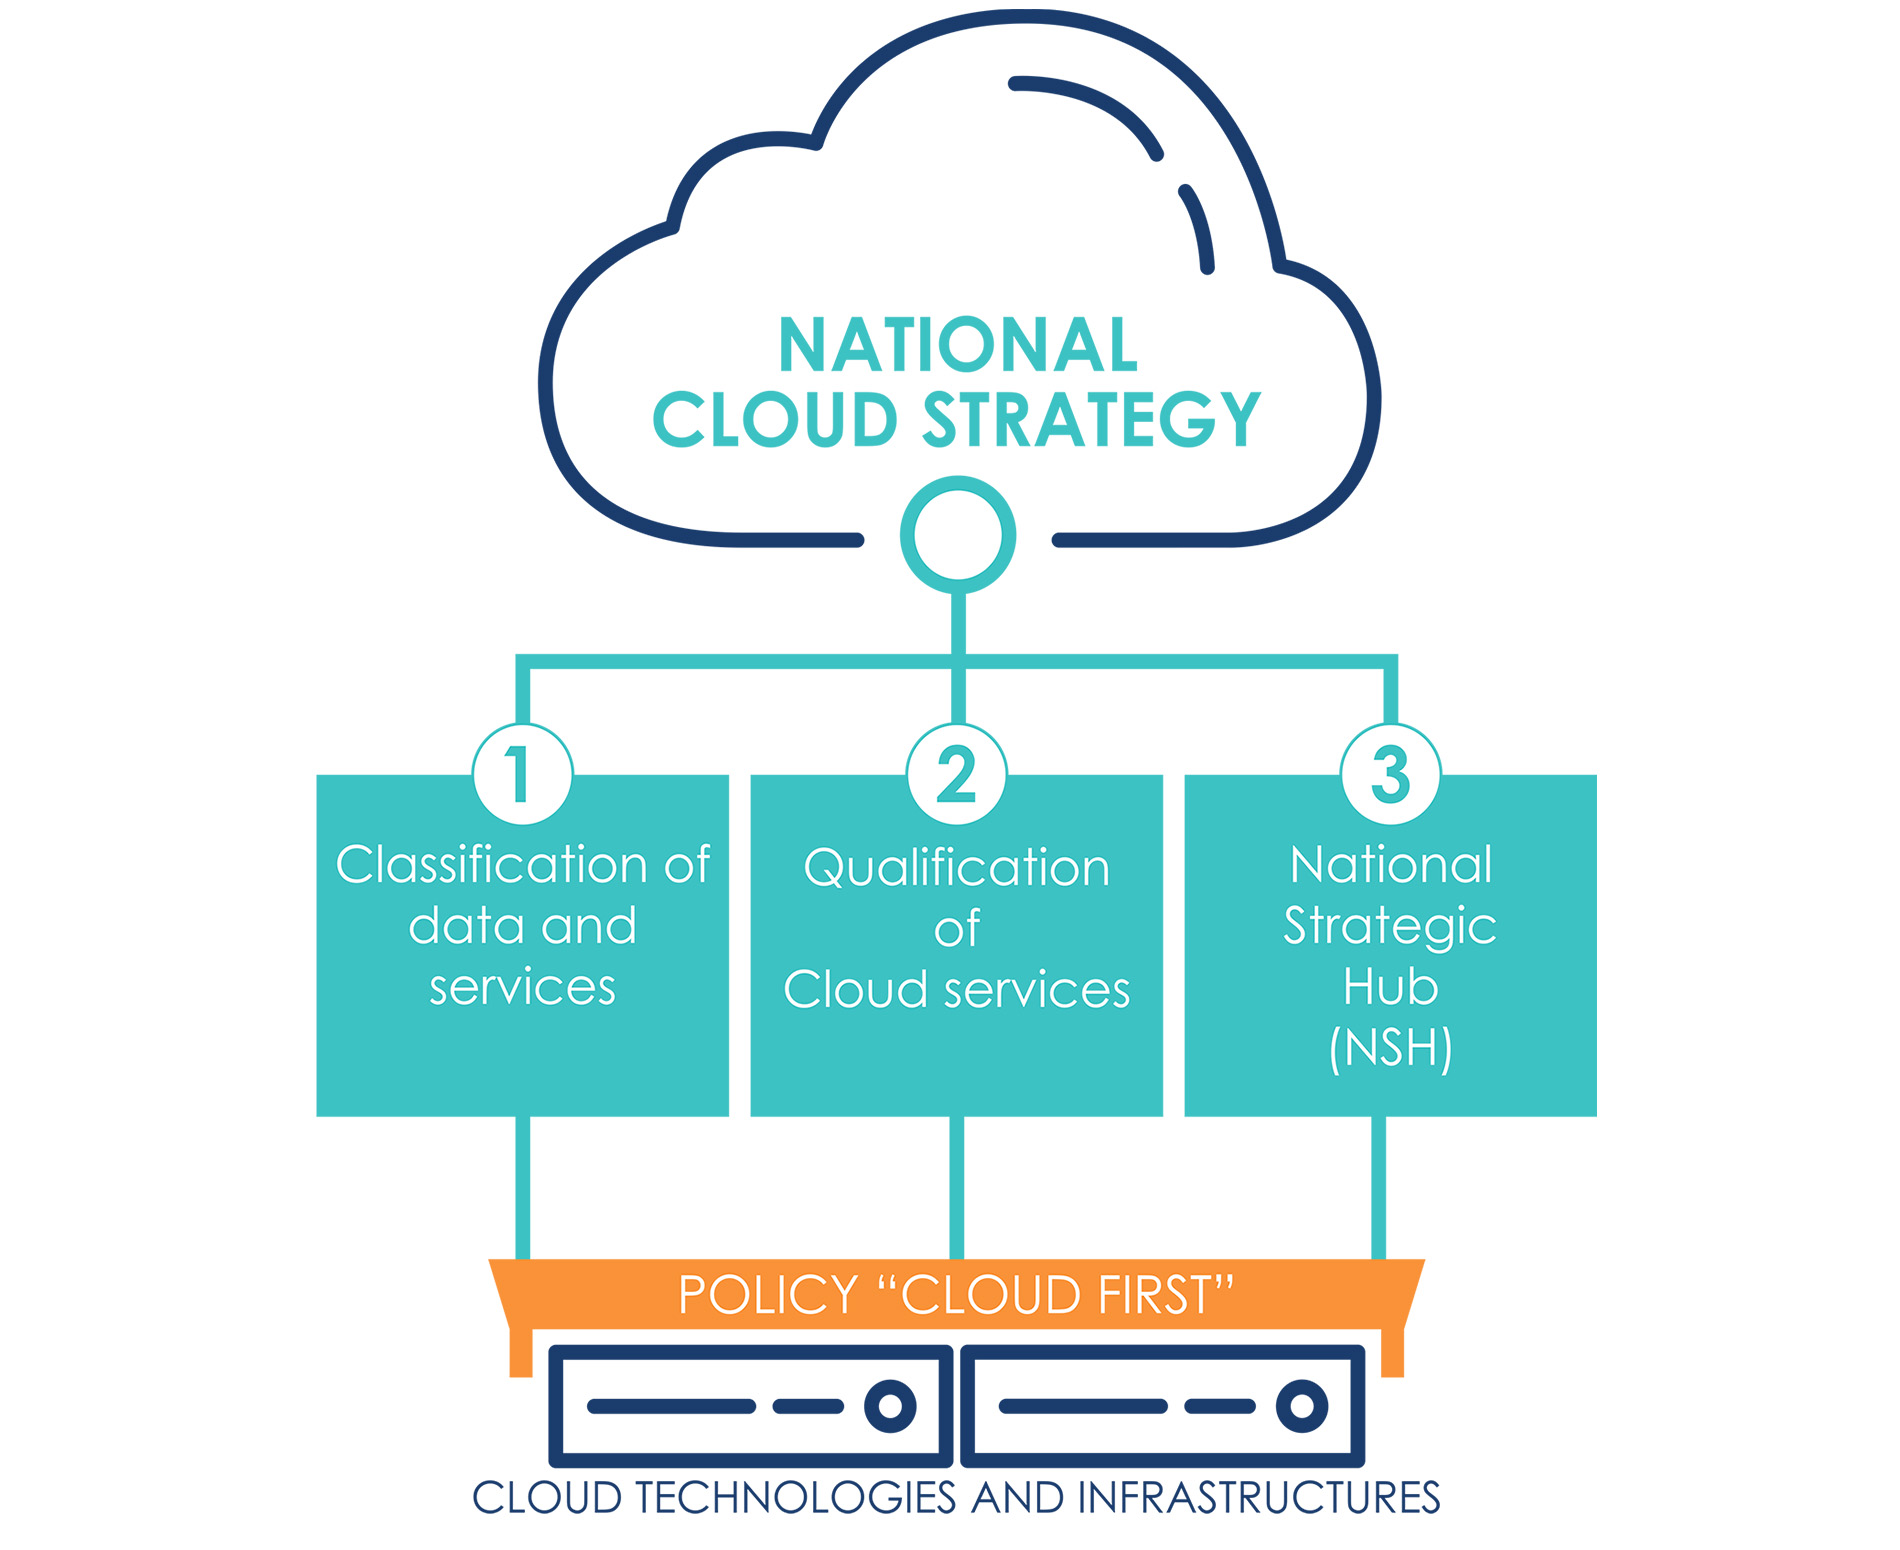 Figure showing the guidelines of the Cloud Strategy.